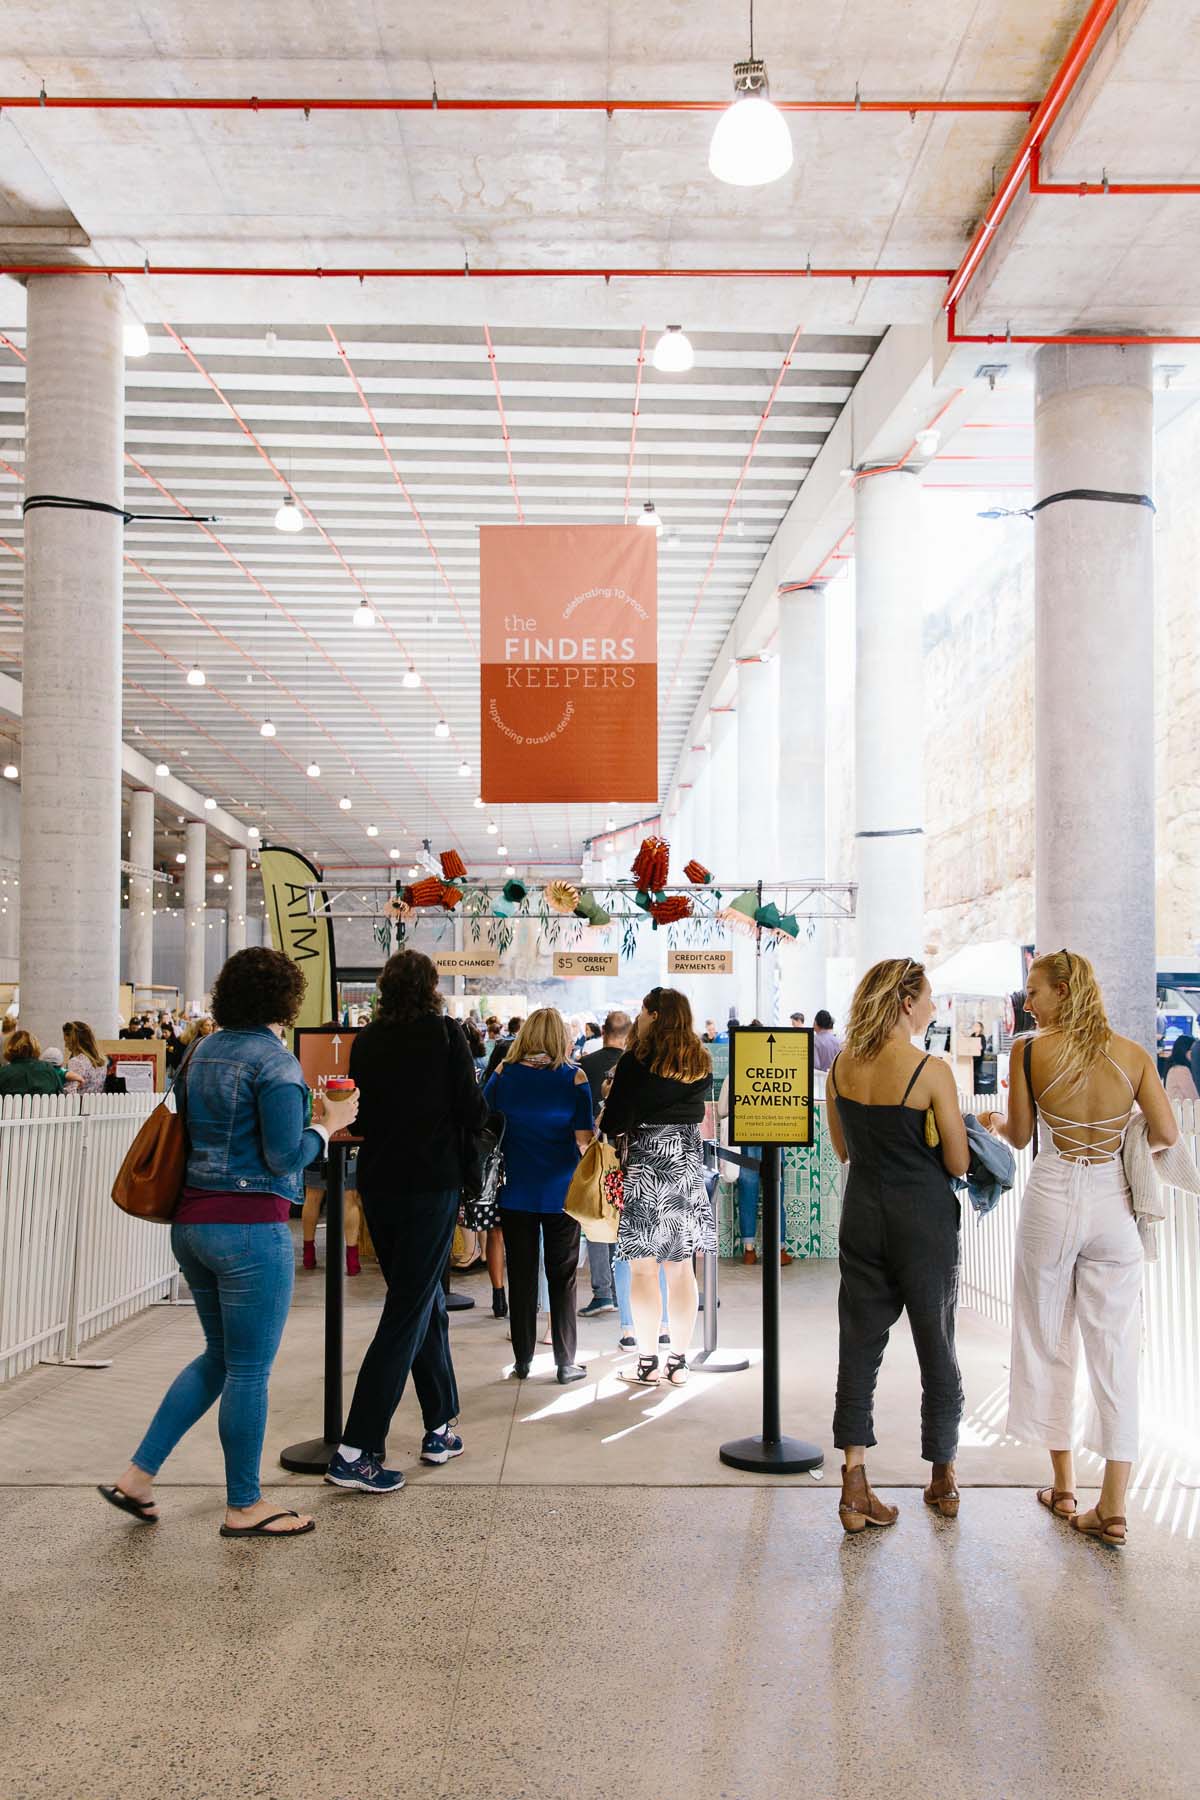 The bright and welcoming entry way to The Finders Keepers Market Sydney Australia